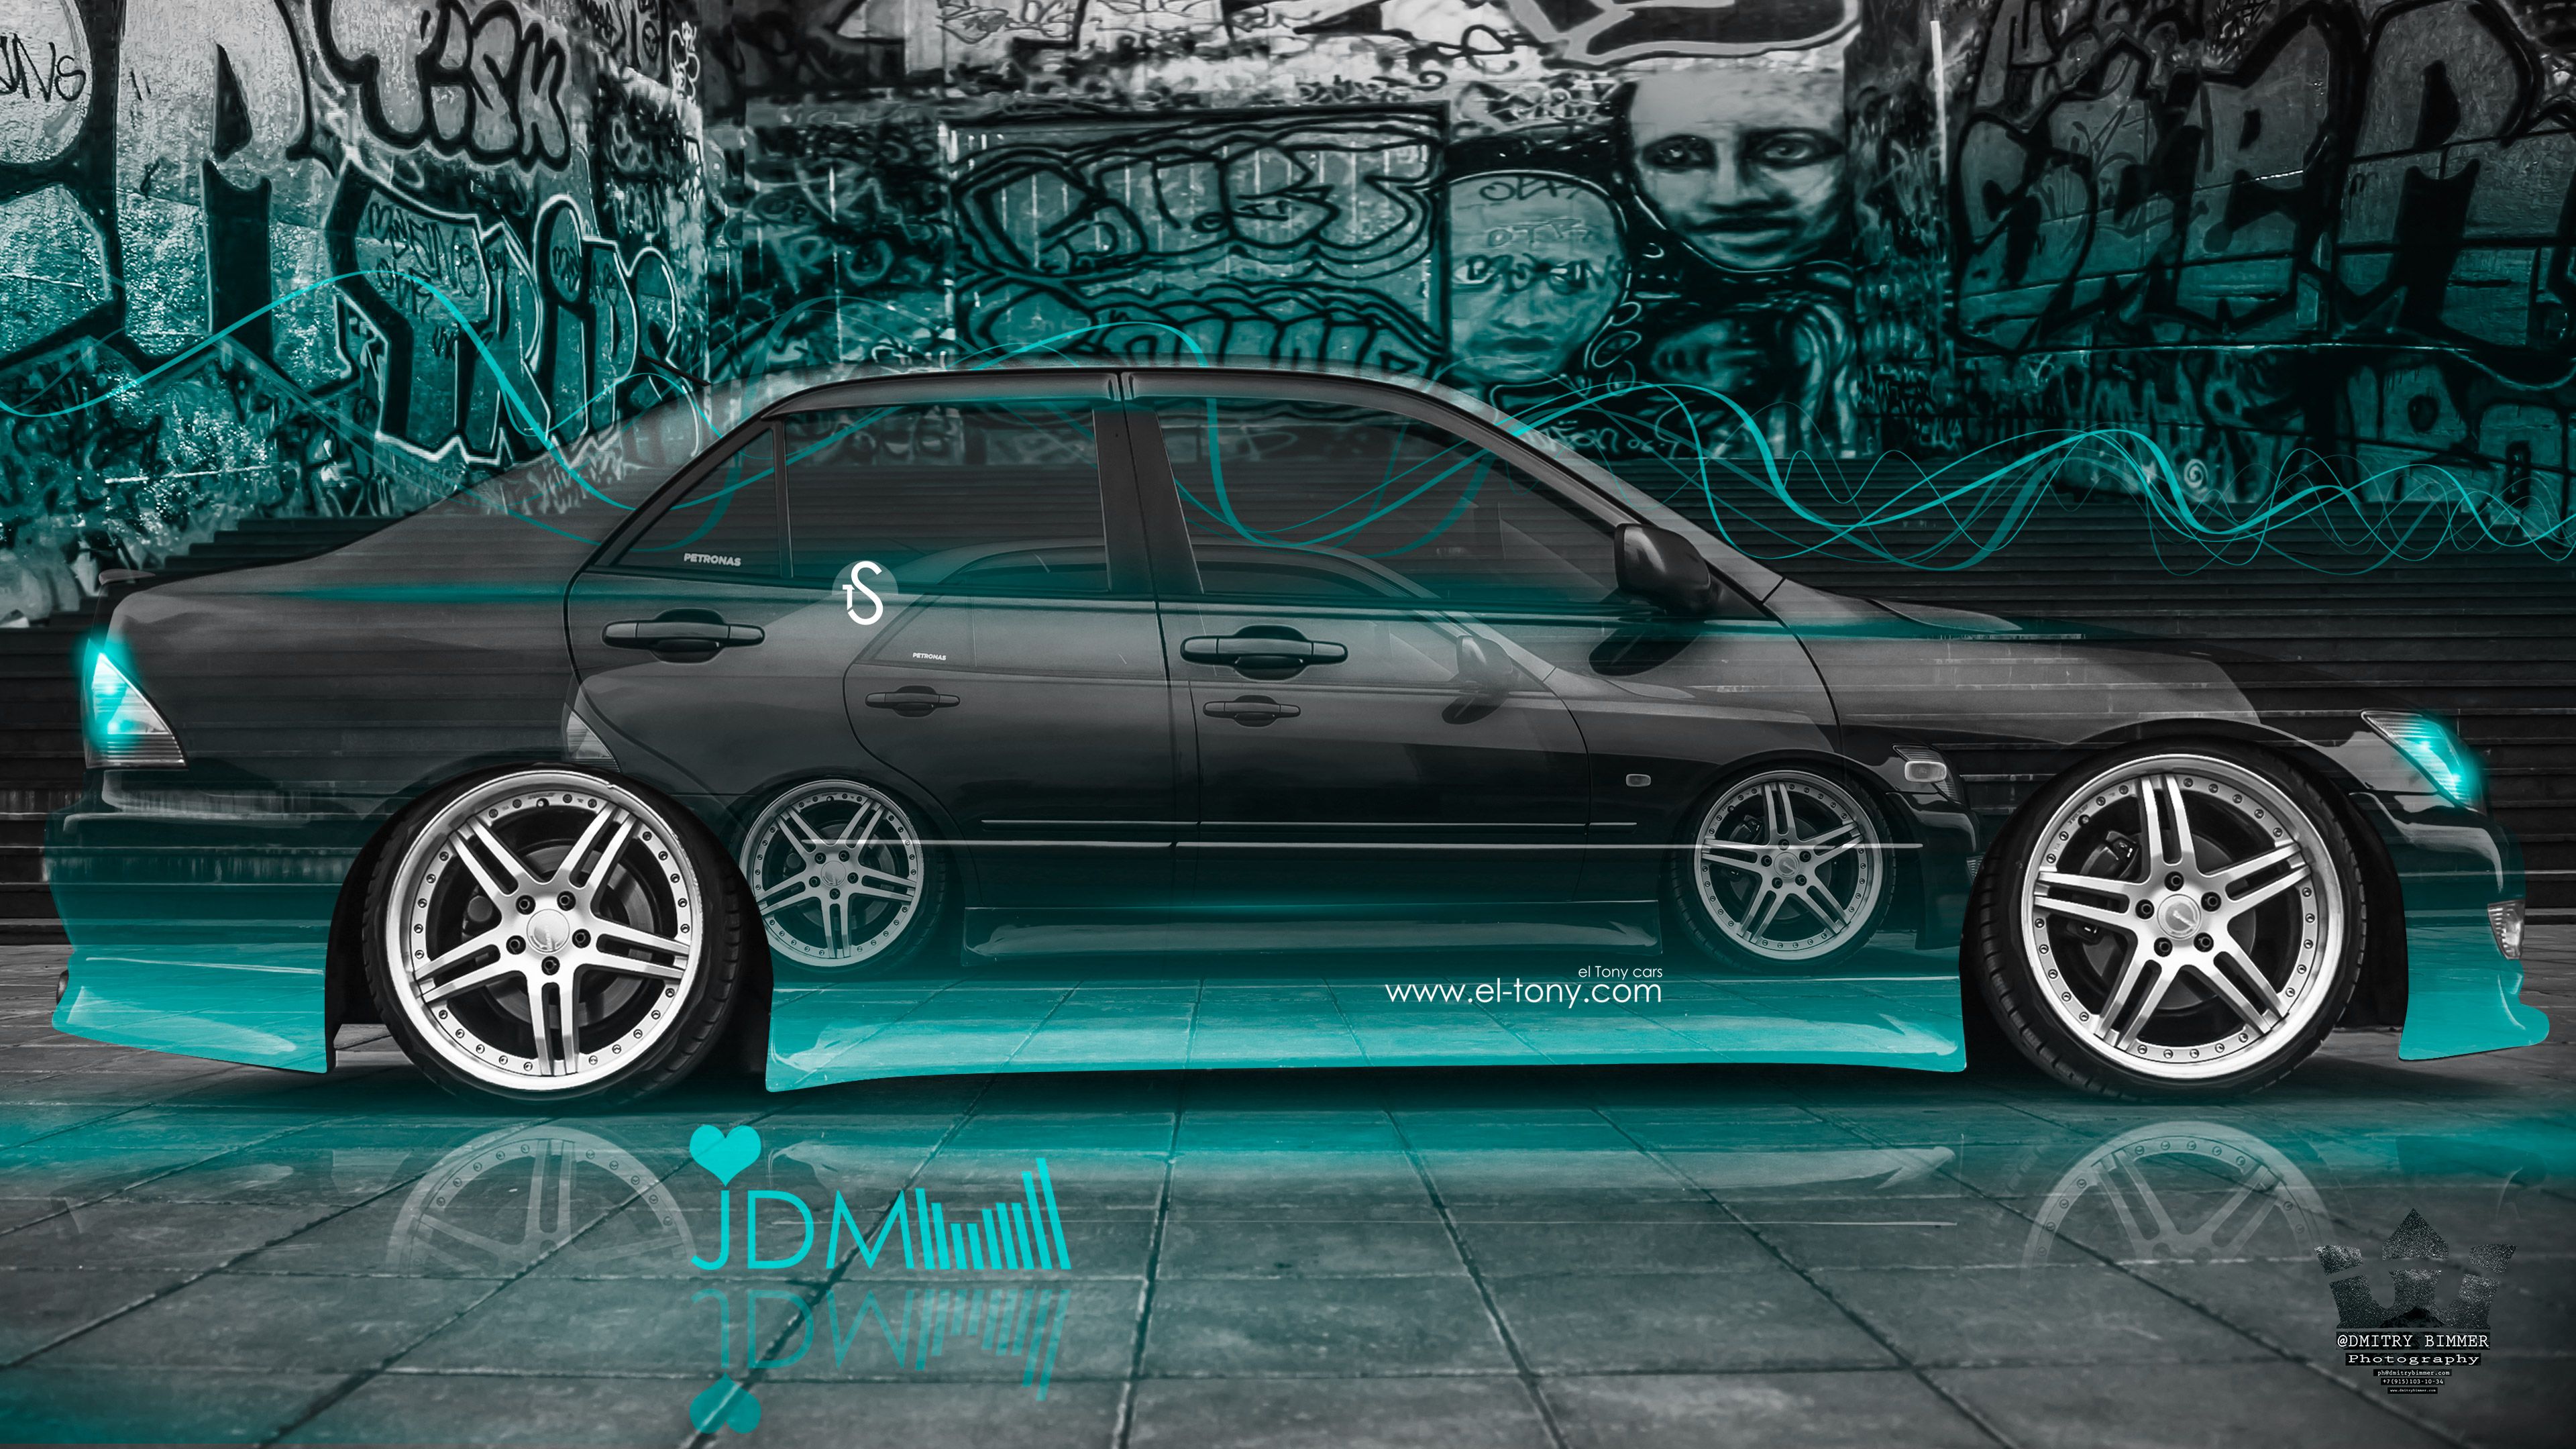 Toyota Altezza Two Cars JDM 2X Tuning Crystal Car 2016 Wallpaper